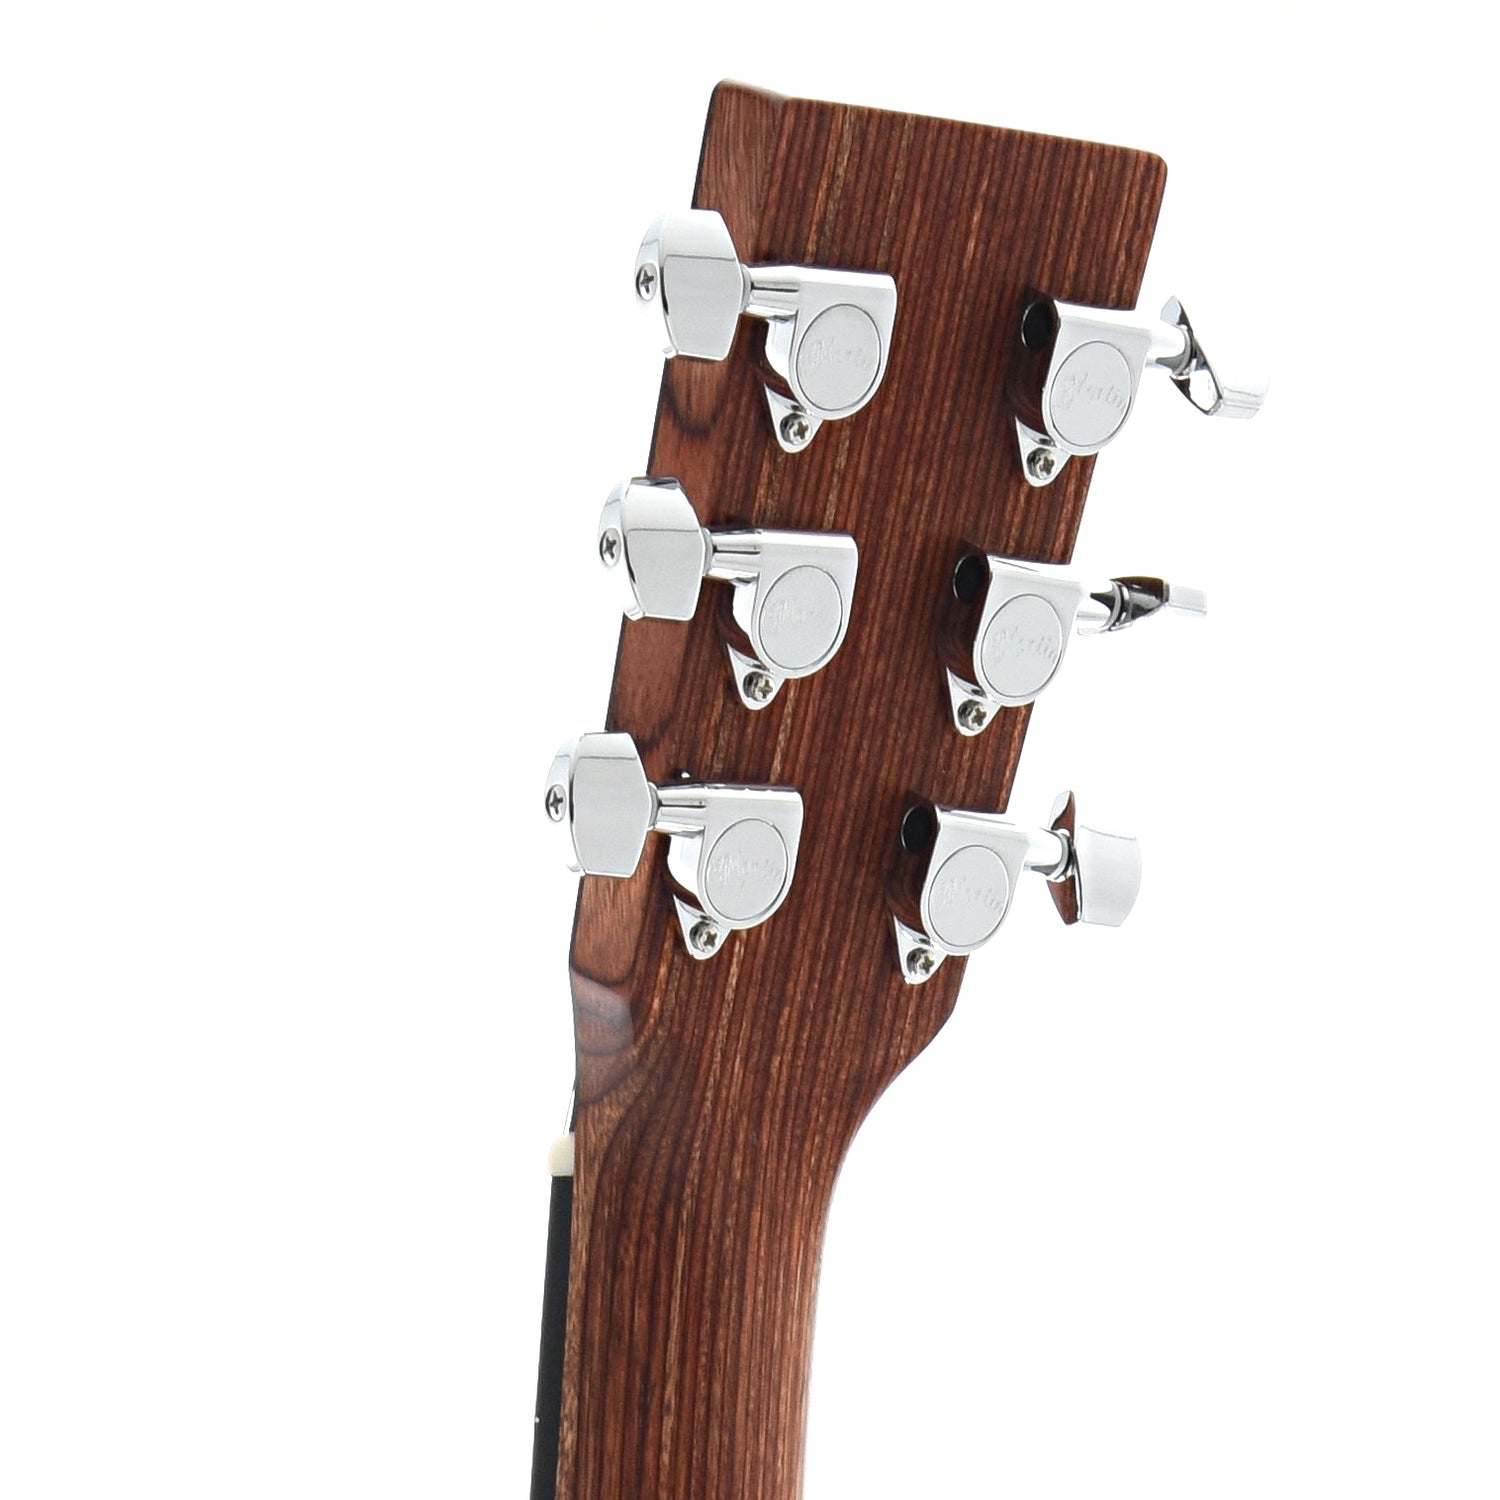 Back Headstock of Martin LX1E Little Martin Solid Spruce Top Guitar